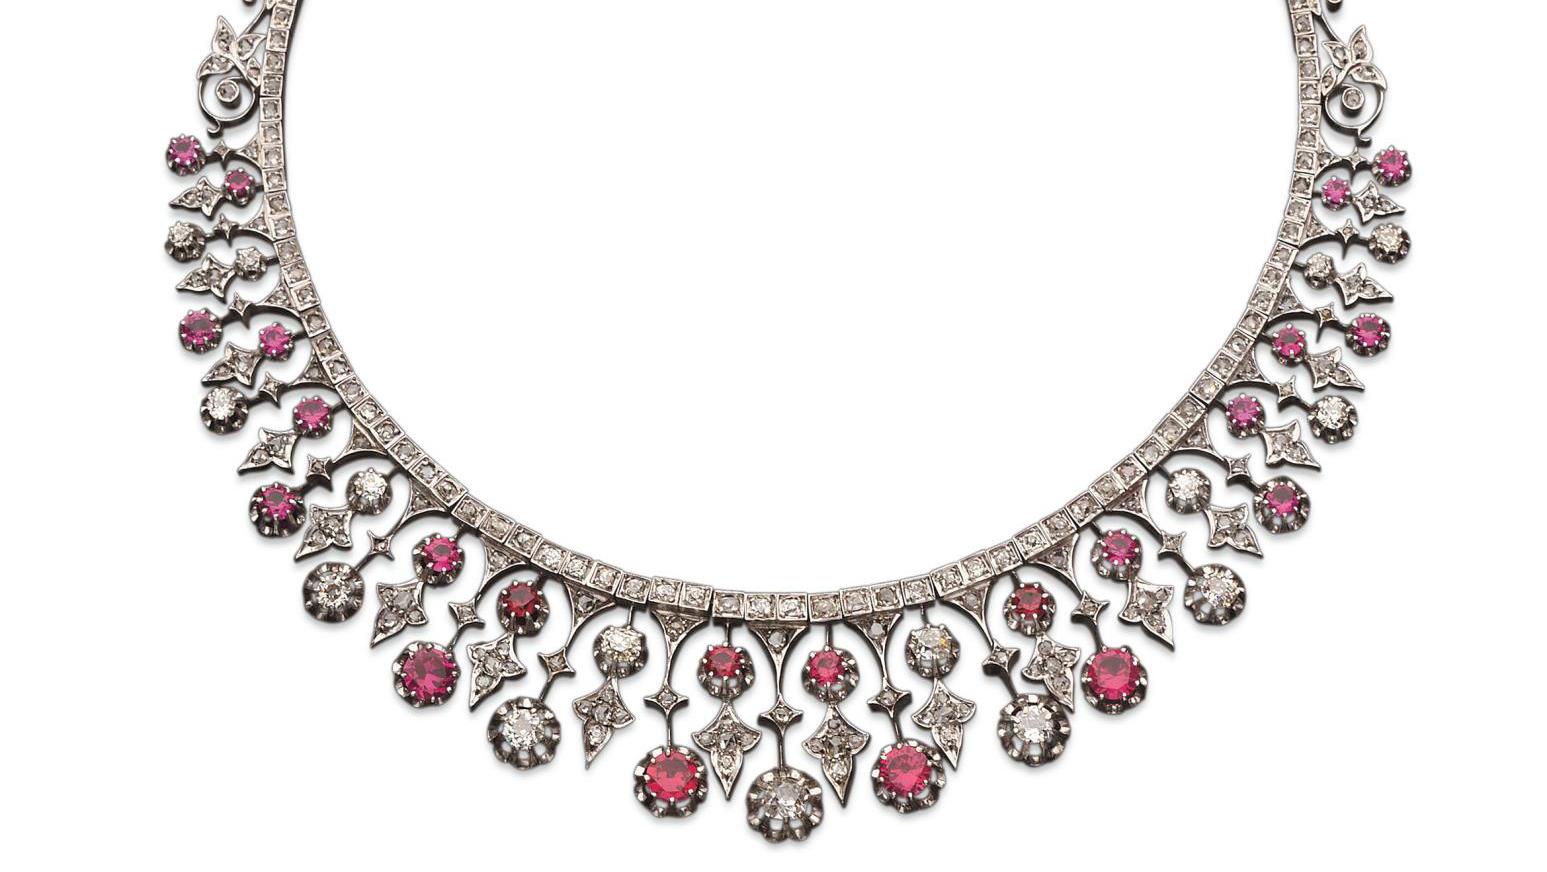 Beaumont & Cie in Lyon. "Drape" necklace, before 1890, articulated white gold, antique-... The Art of Fin-de-Siècle Jewelry